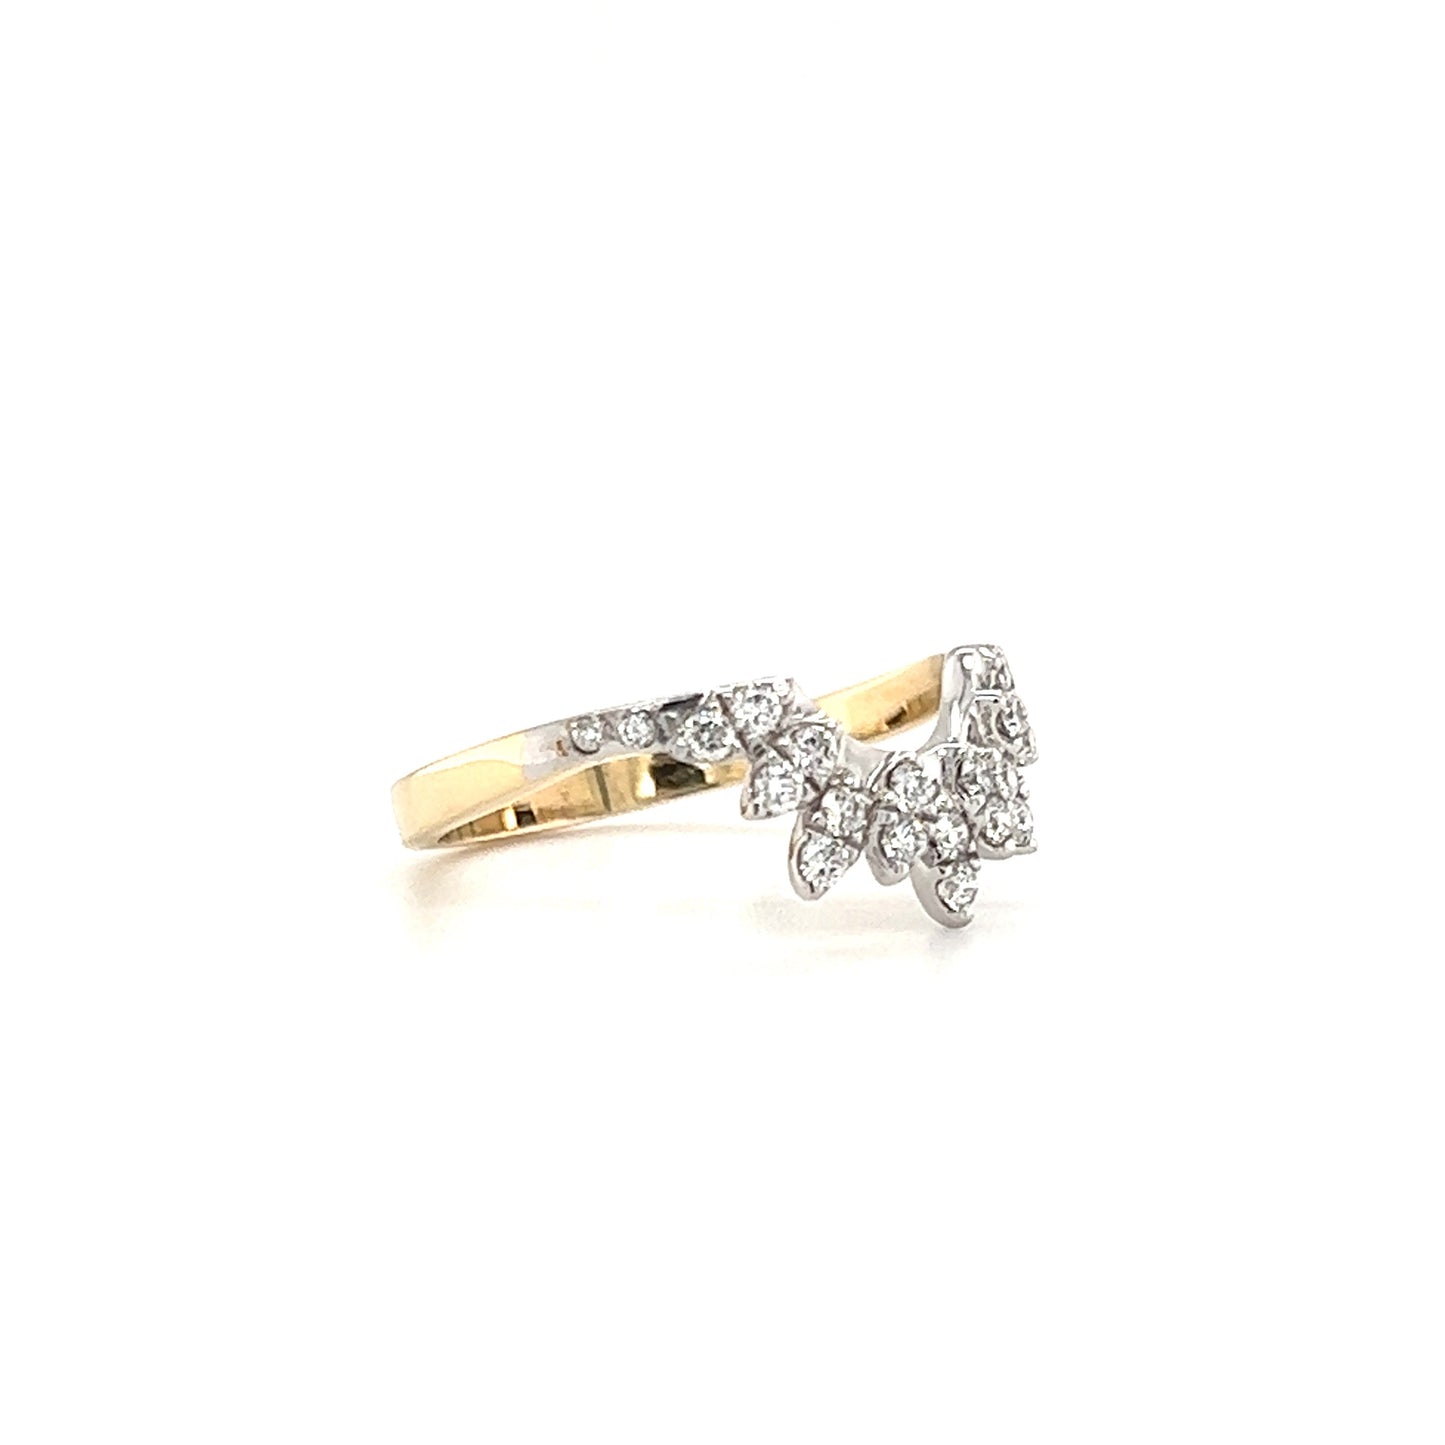 Sunburst Diamond Ring with Twenty-Two Diamond in 14K Yellow and White Gold Left Side View